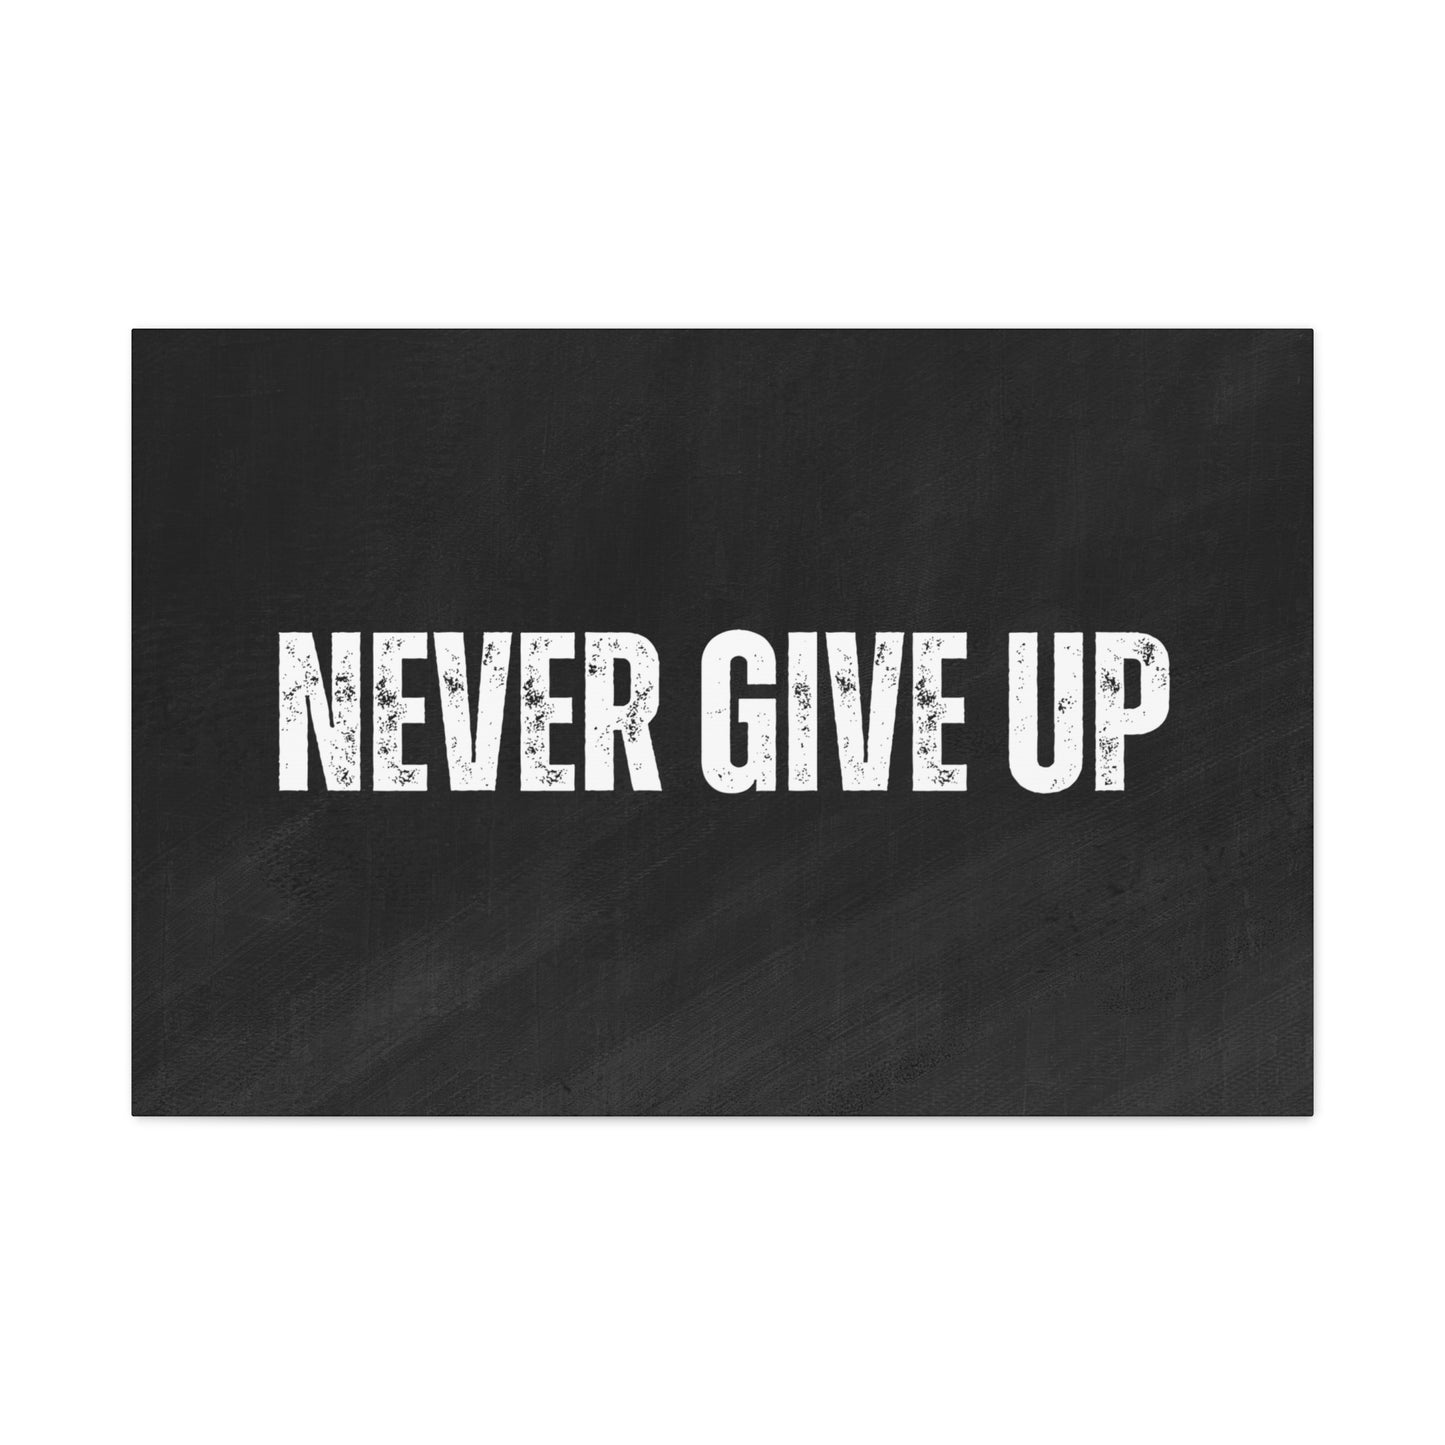 "Never Give Up" Wall Art - Weave Got Gifts - Unique Gifts You Won’t Find Anywhere Else!